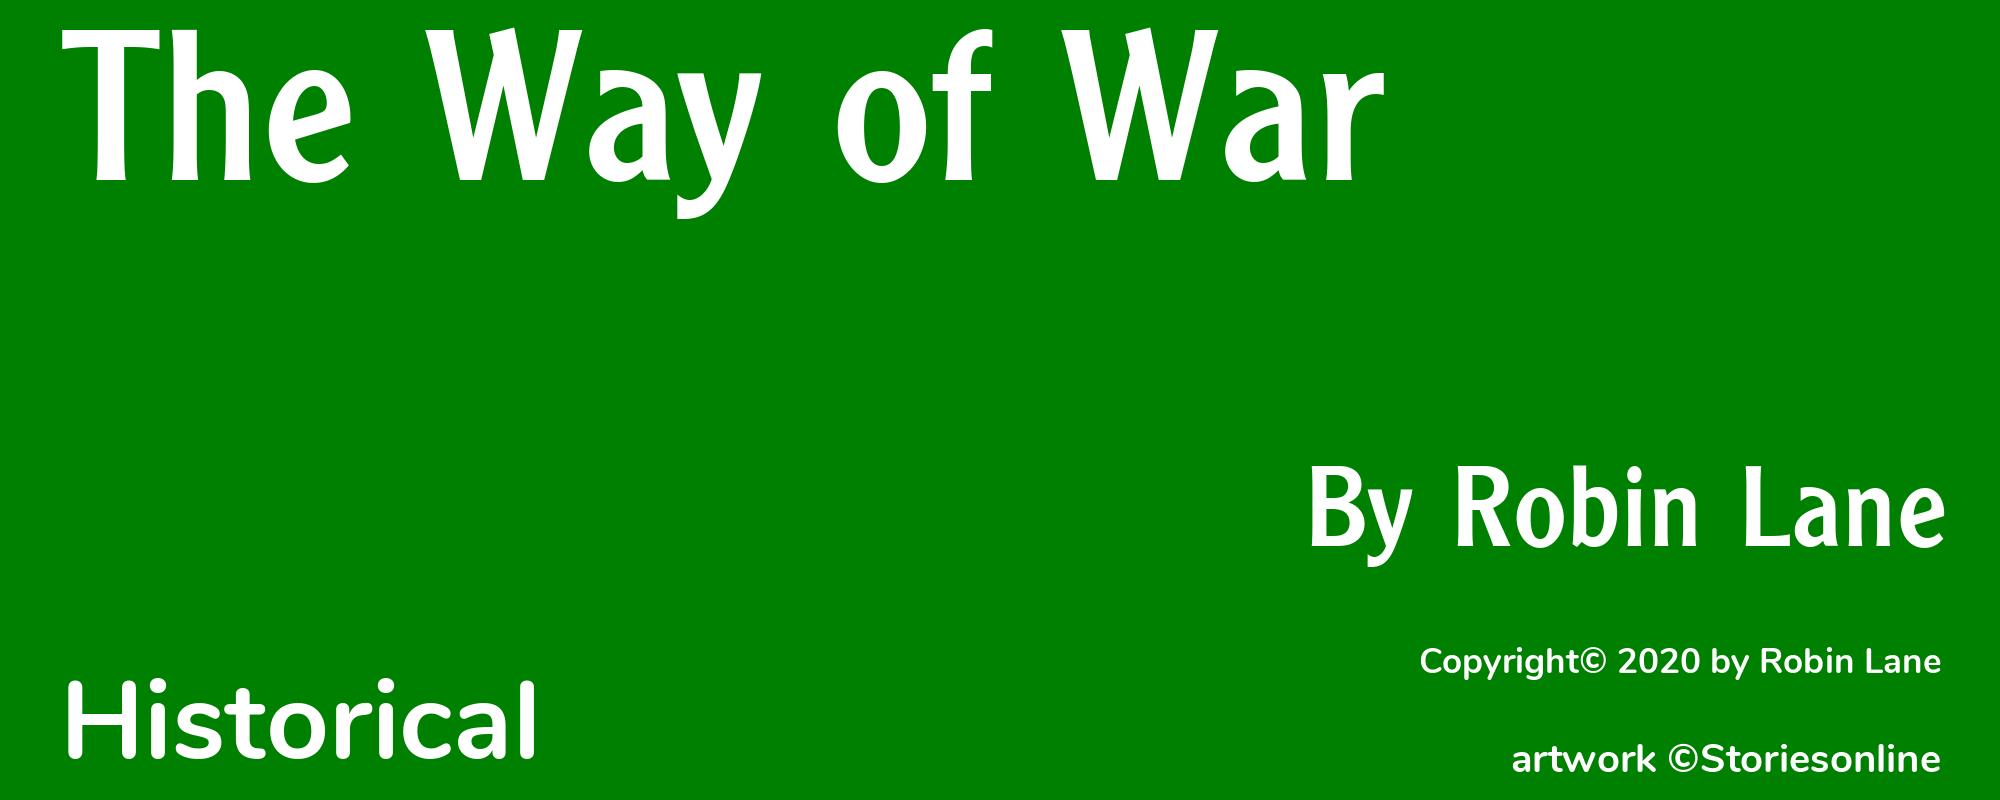 The Way of War - Cover